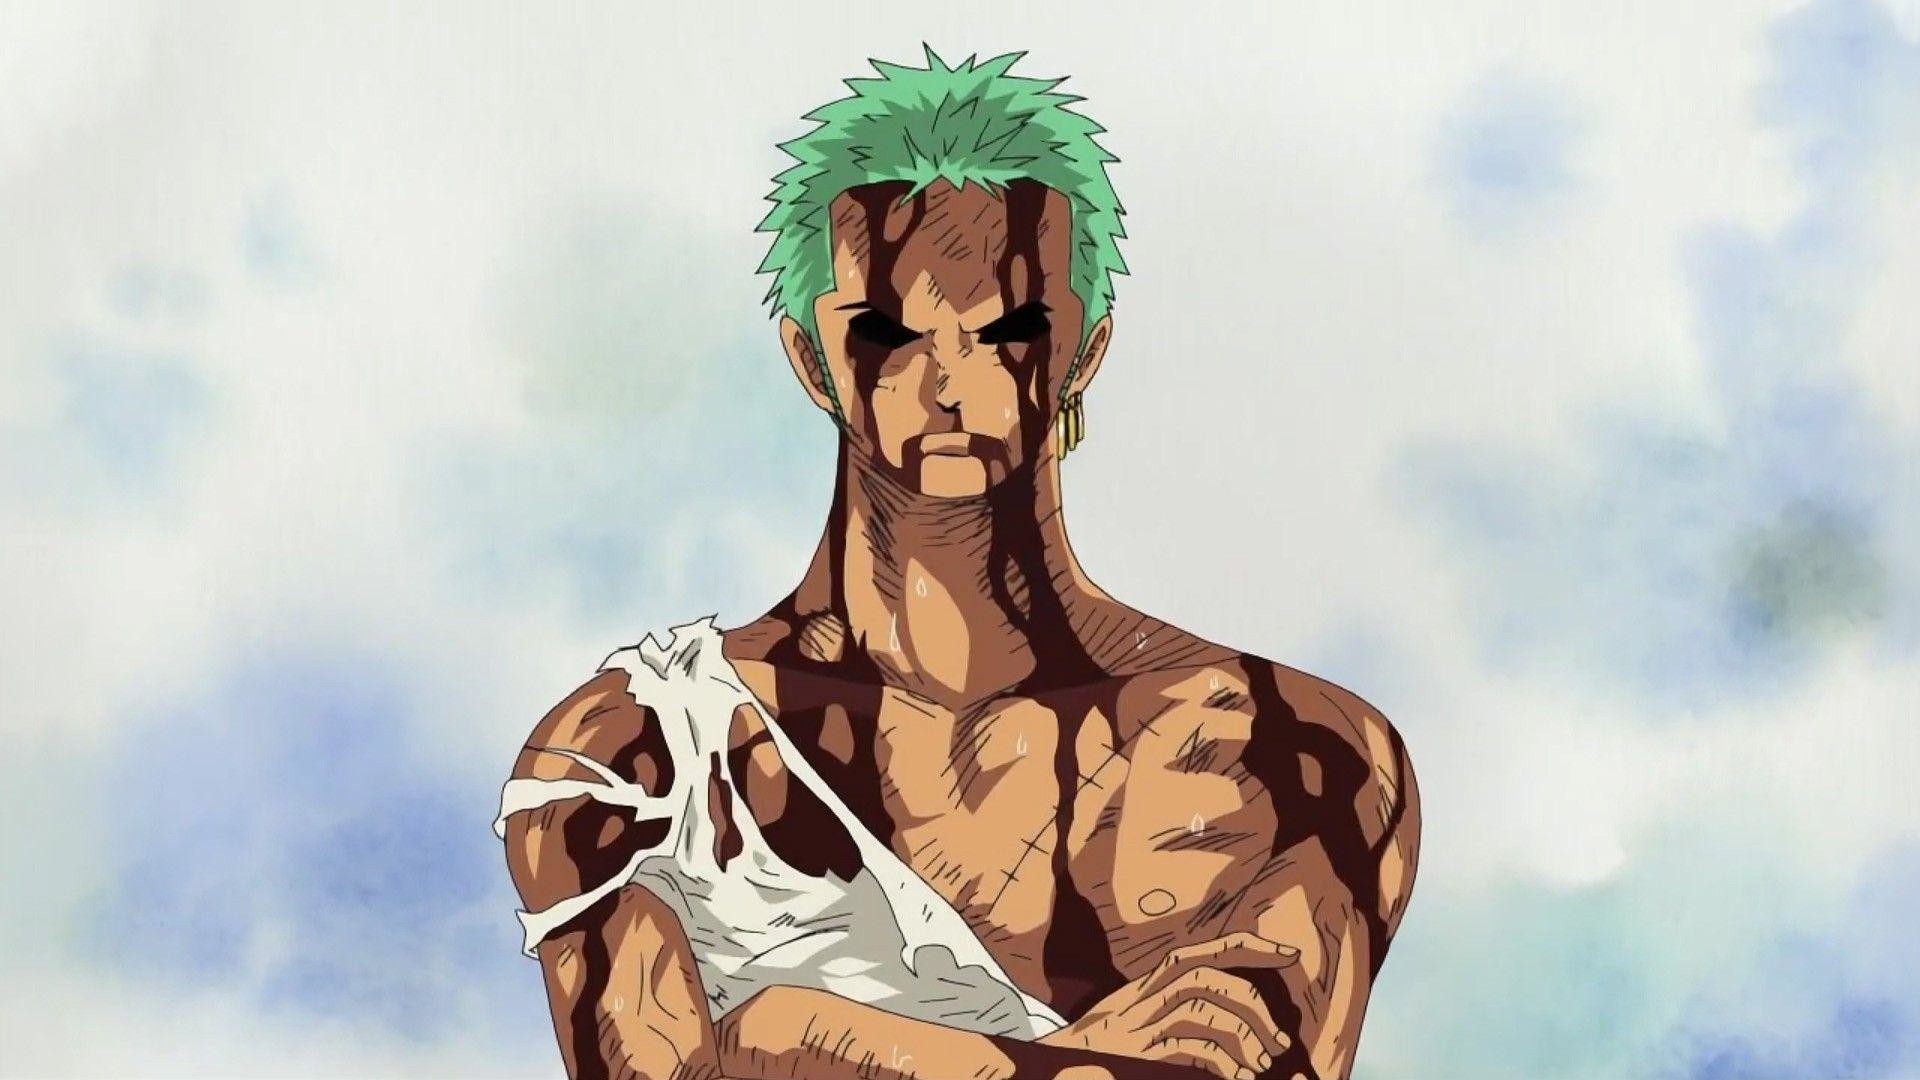 Wallpapers For > One Piece Zoro Iphone Wallpaper